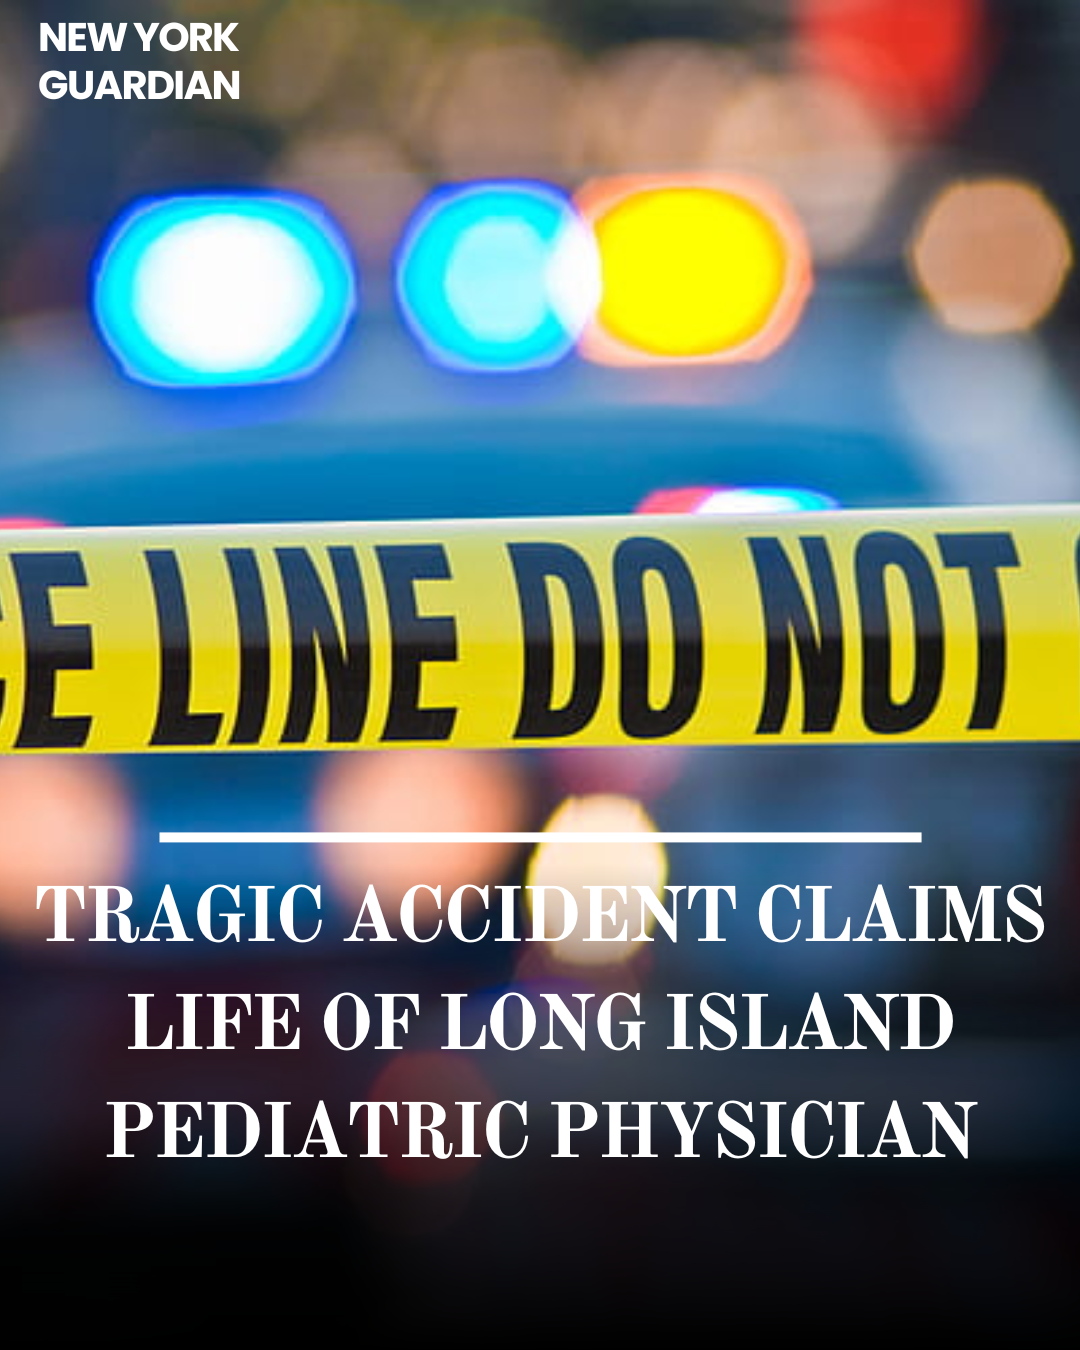 A horrific tragedy on a Long Island roadway took the life of Dr. Monika Woroniecka, a 58-year-old physician.